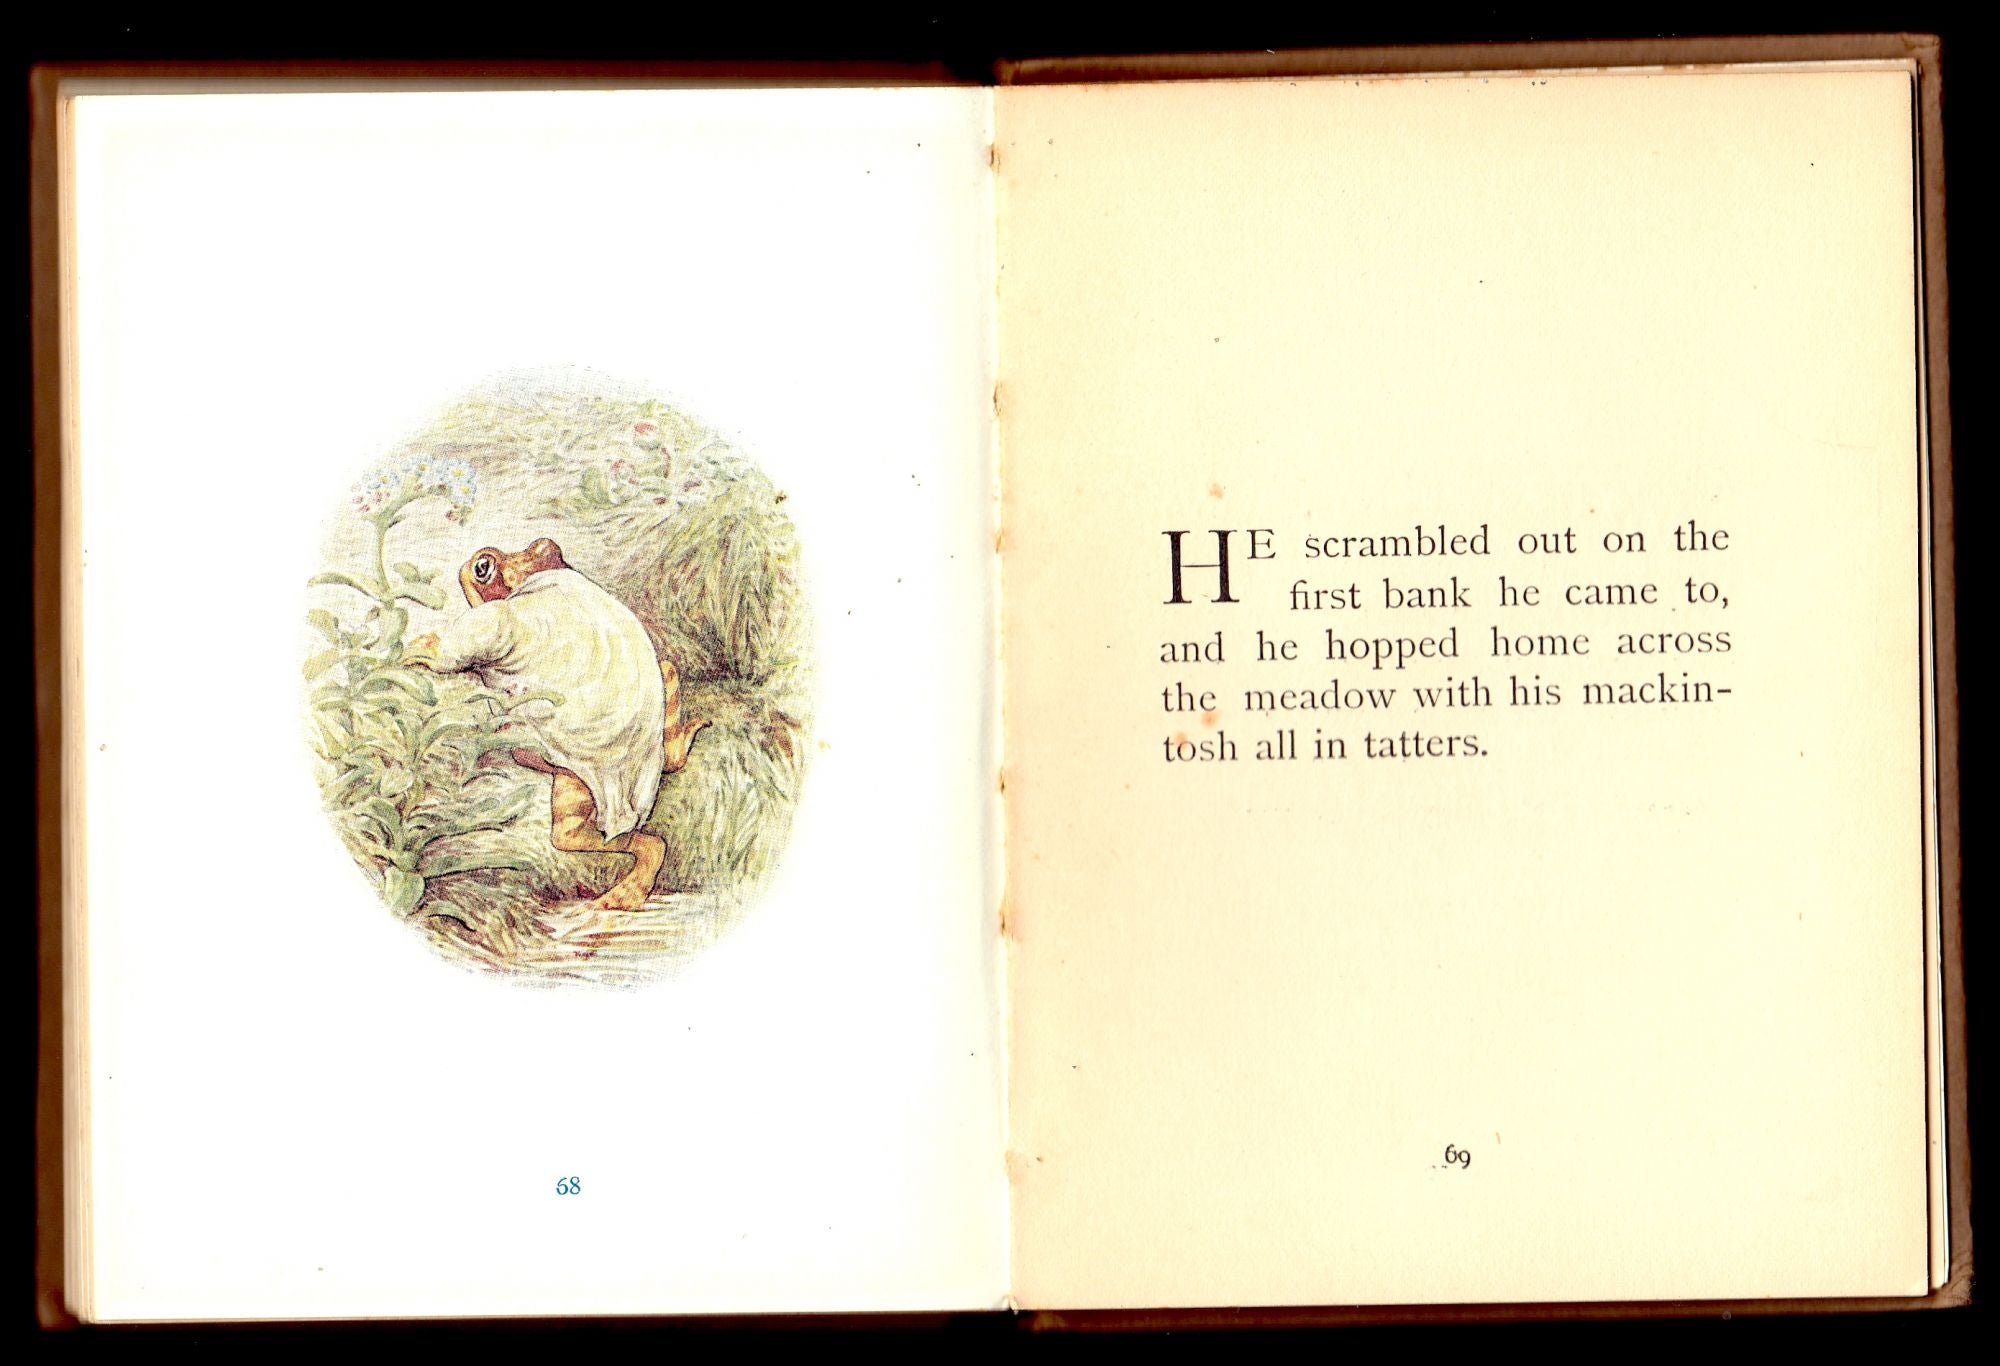 The Tale of Mr. Jeremy Fisher by Beatrix Potter on Old Children's Books